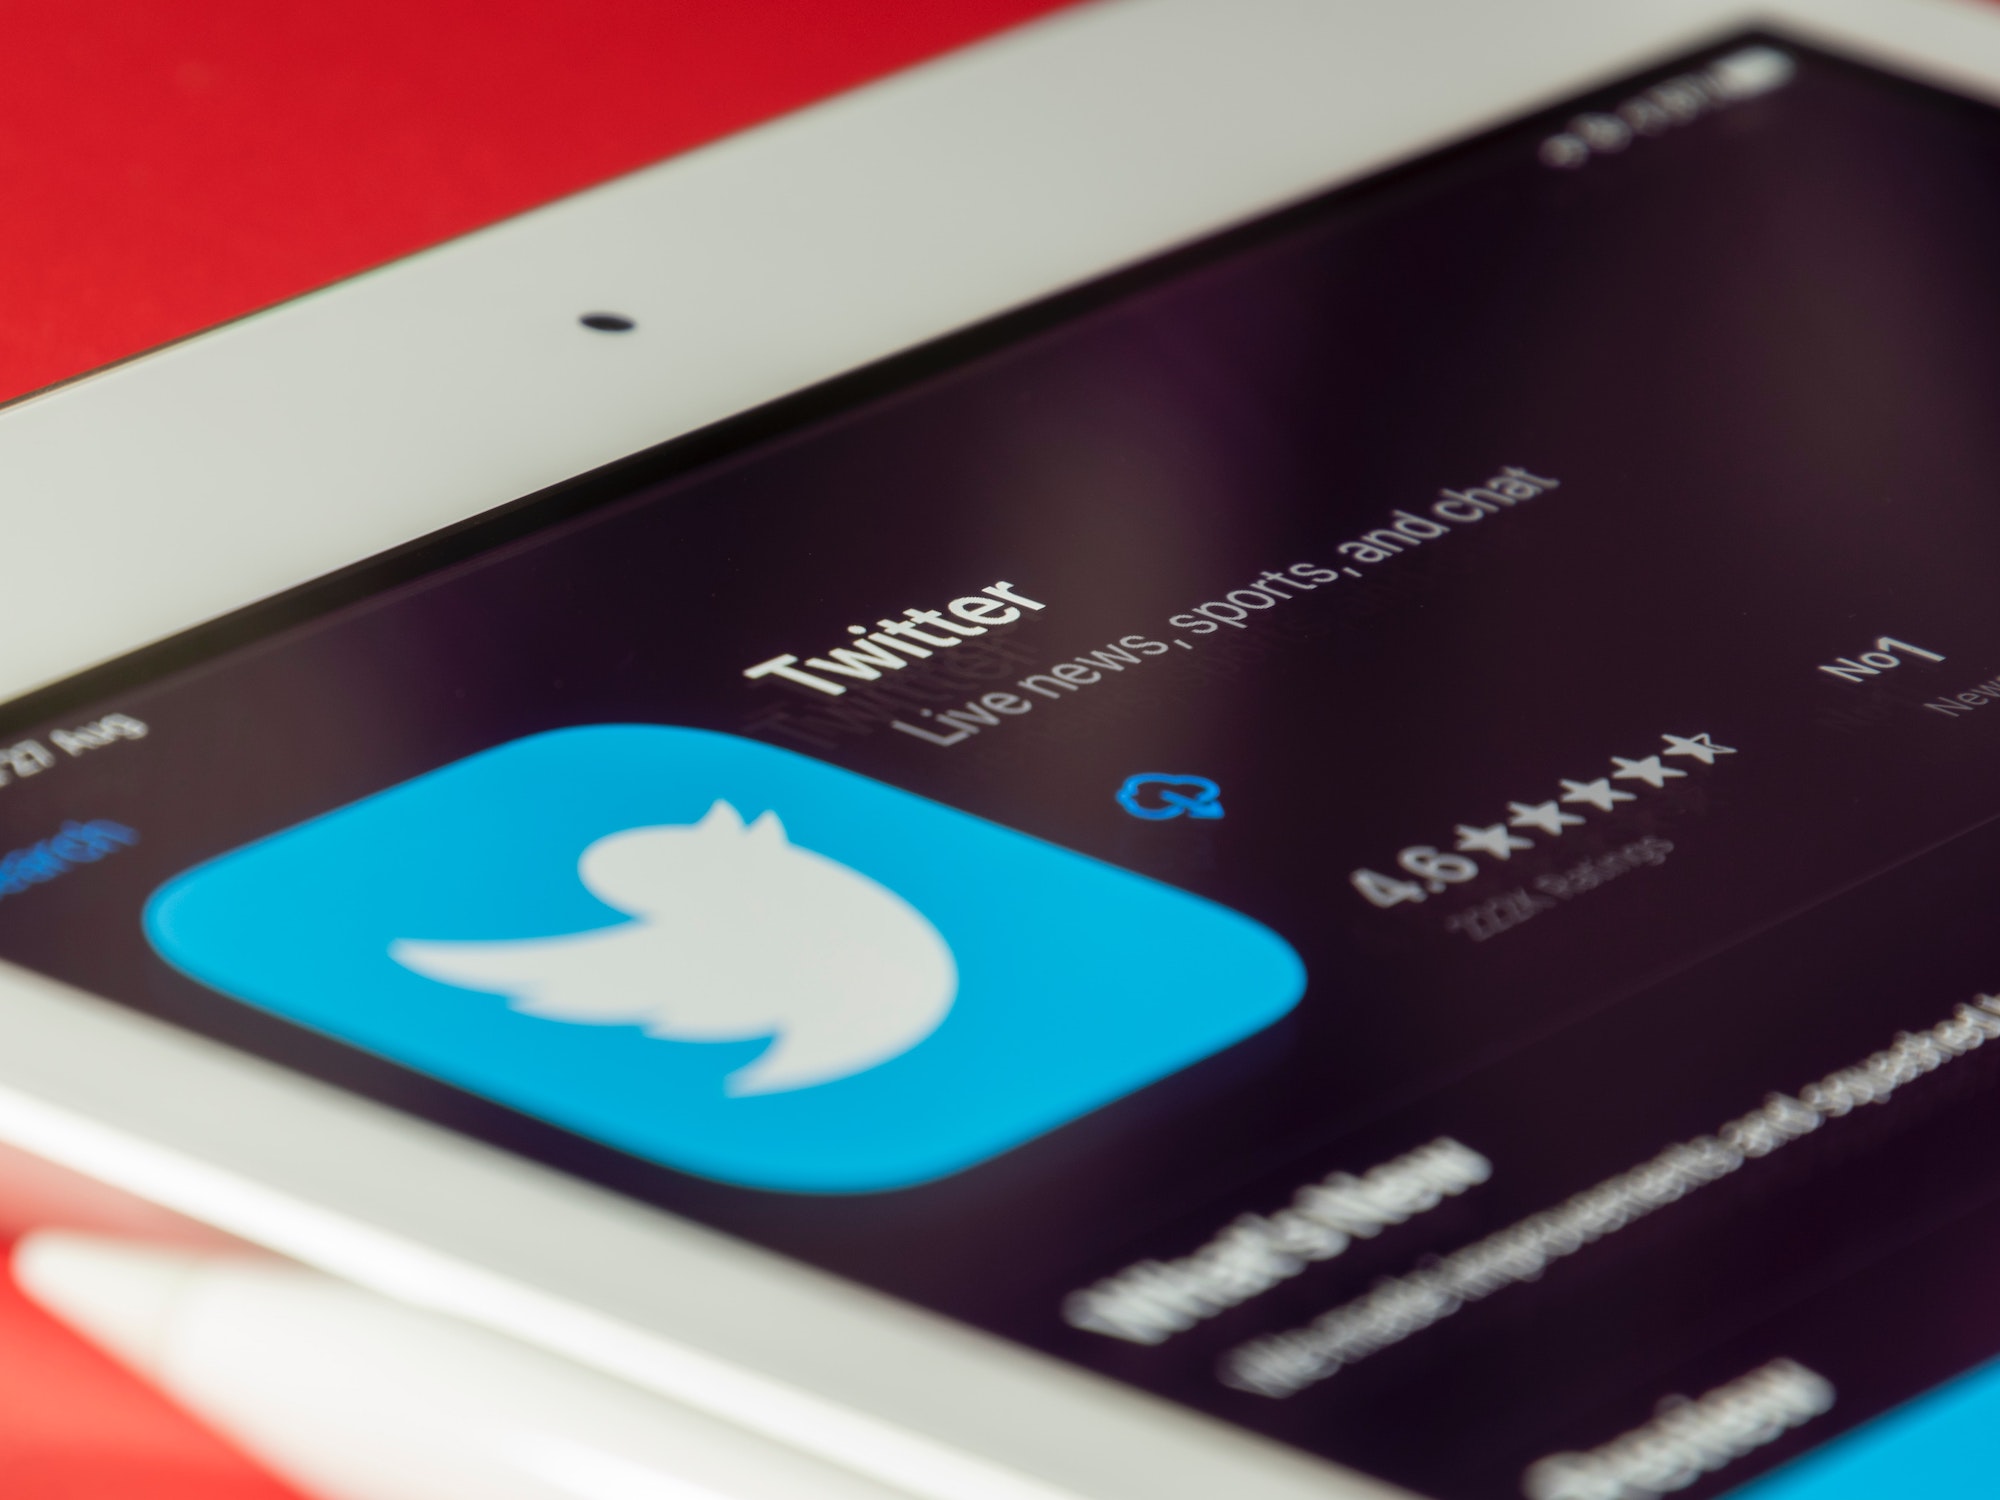 Twitter is testing a much-anticipated edit button